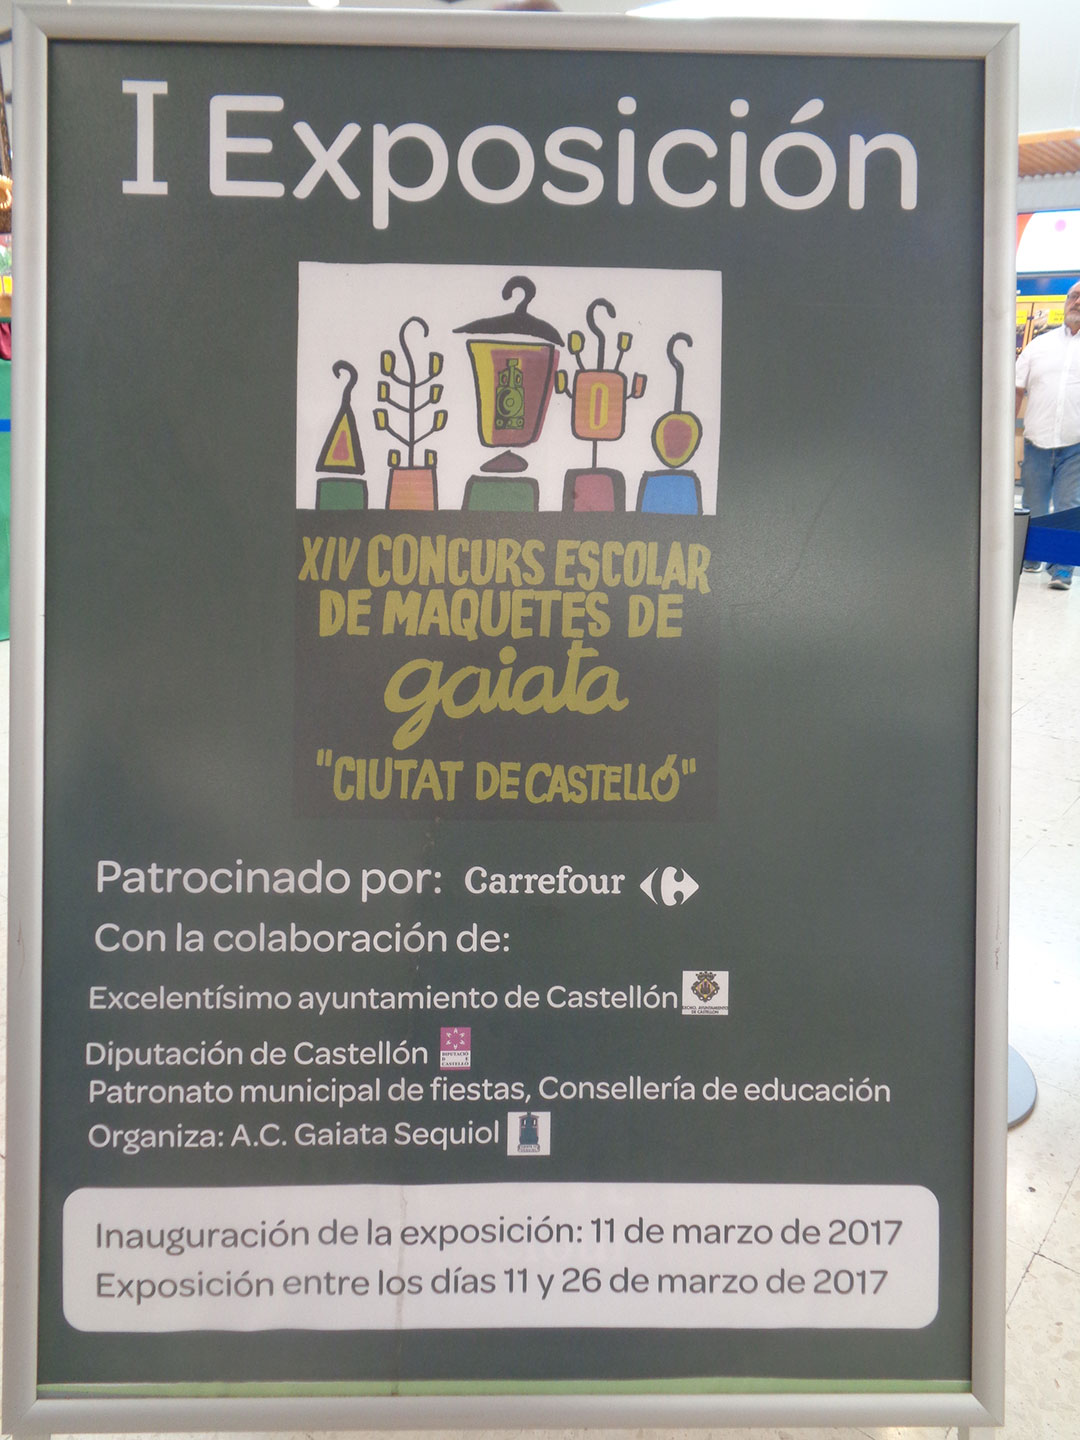 160621-expo-carrefour-1-5845